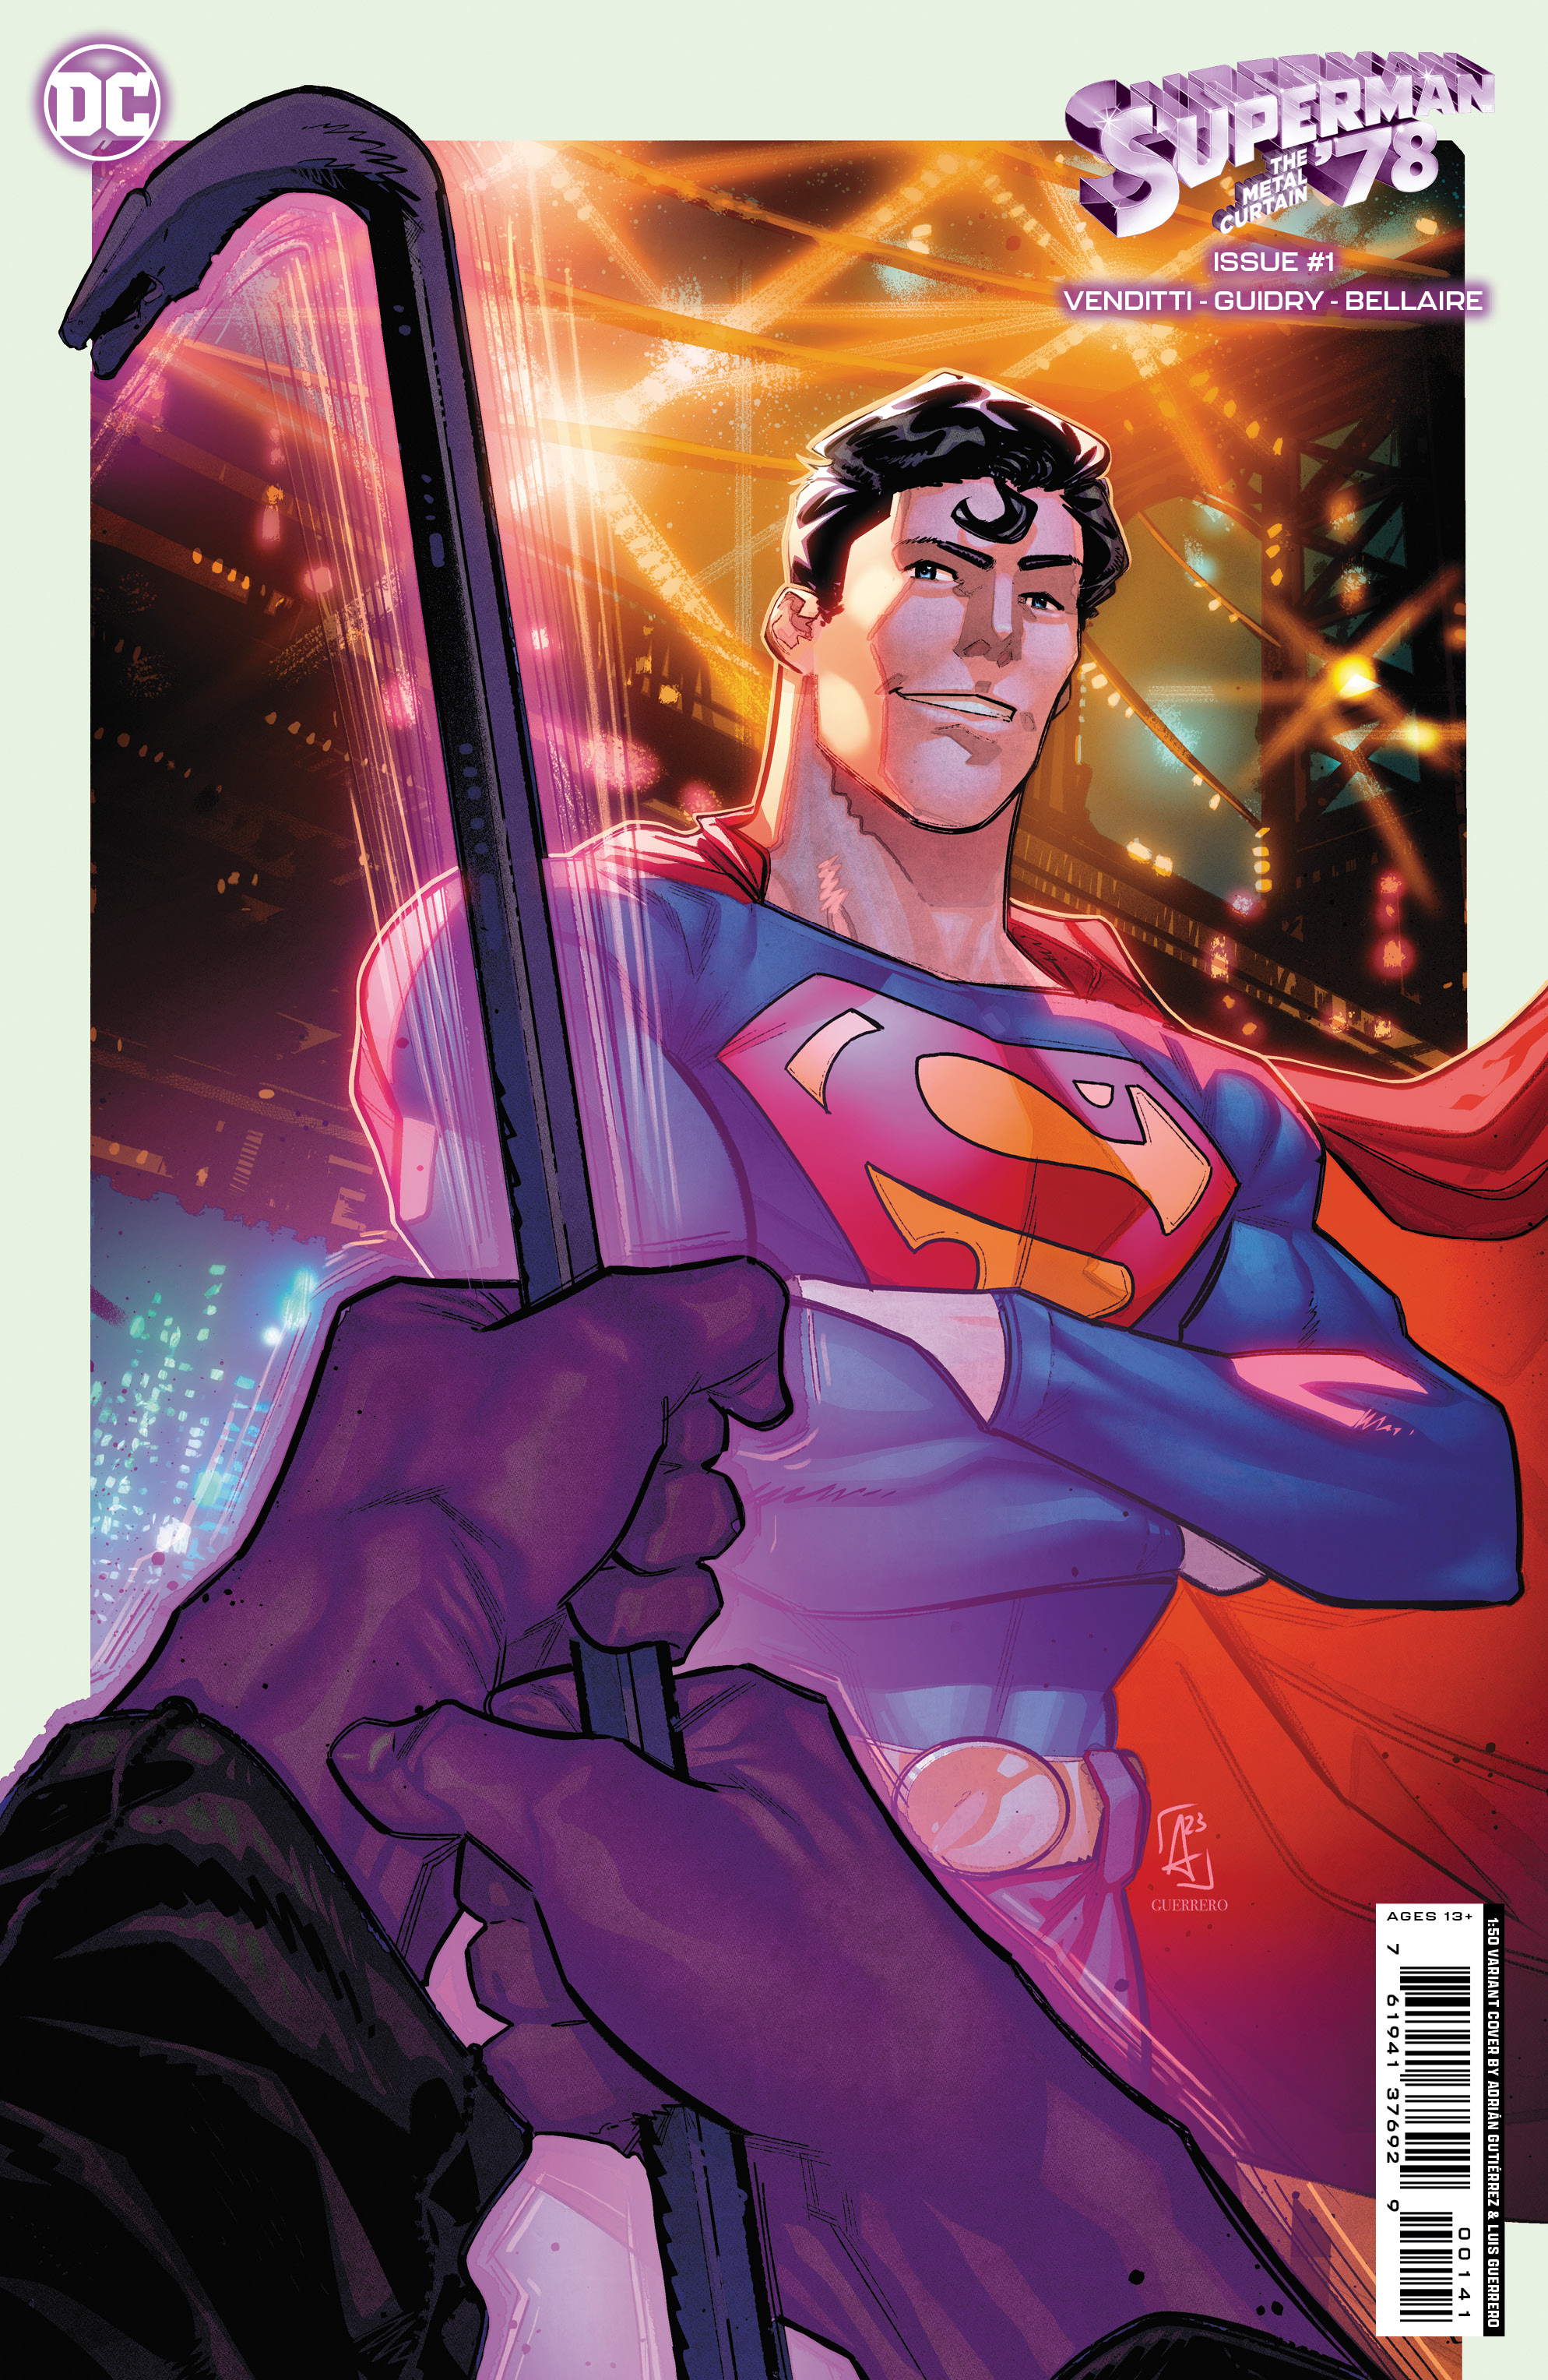 Superman '78 The Metal Curtain #1 Cover F 1 for 50 Incentive Adrian Gutierrez Card Stock Variant (Of 6)